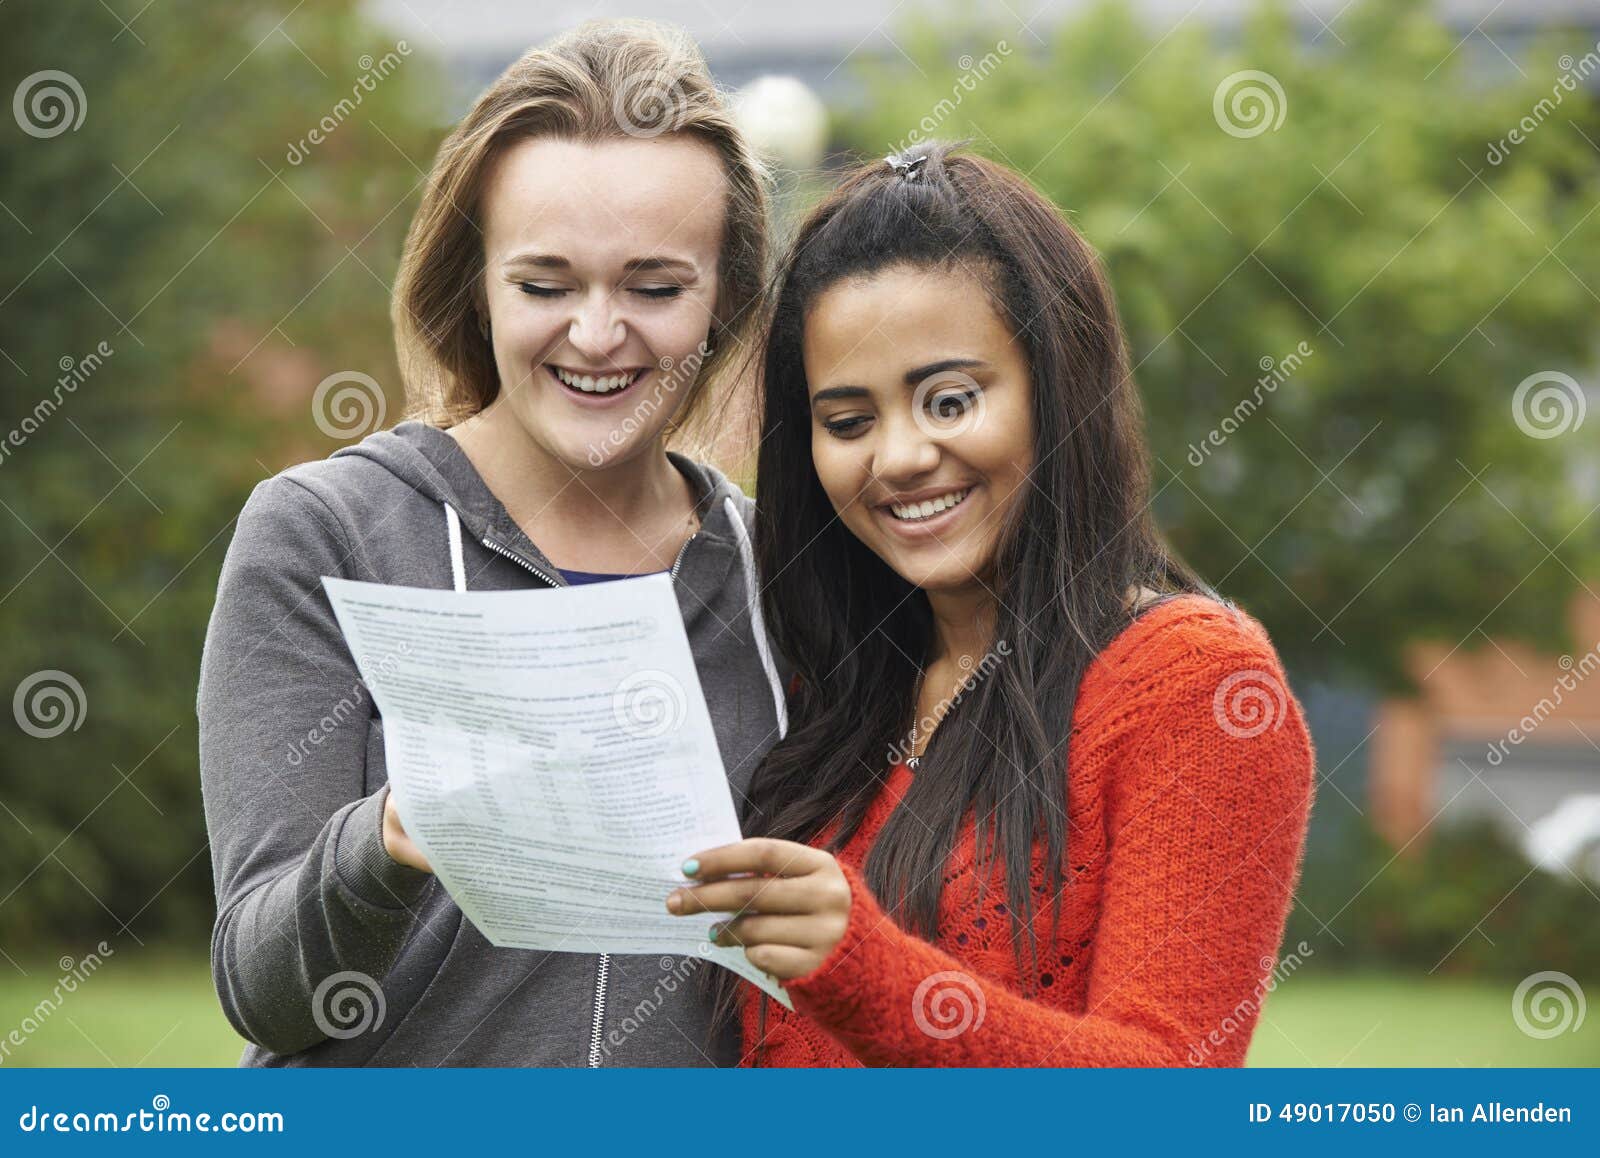 two female students celebrating exam results together